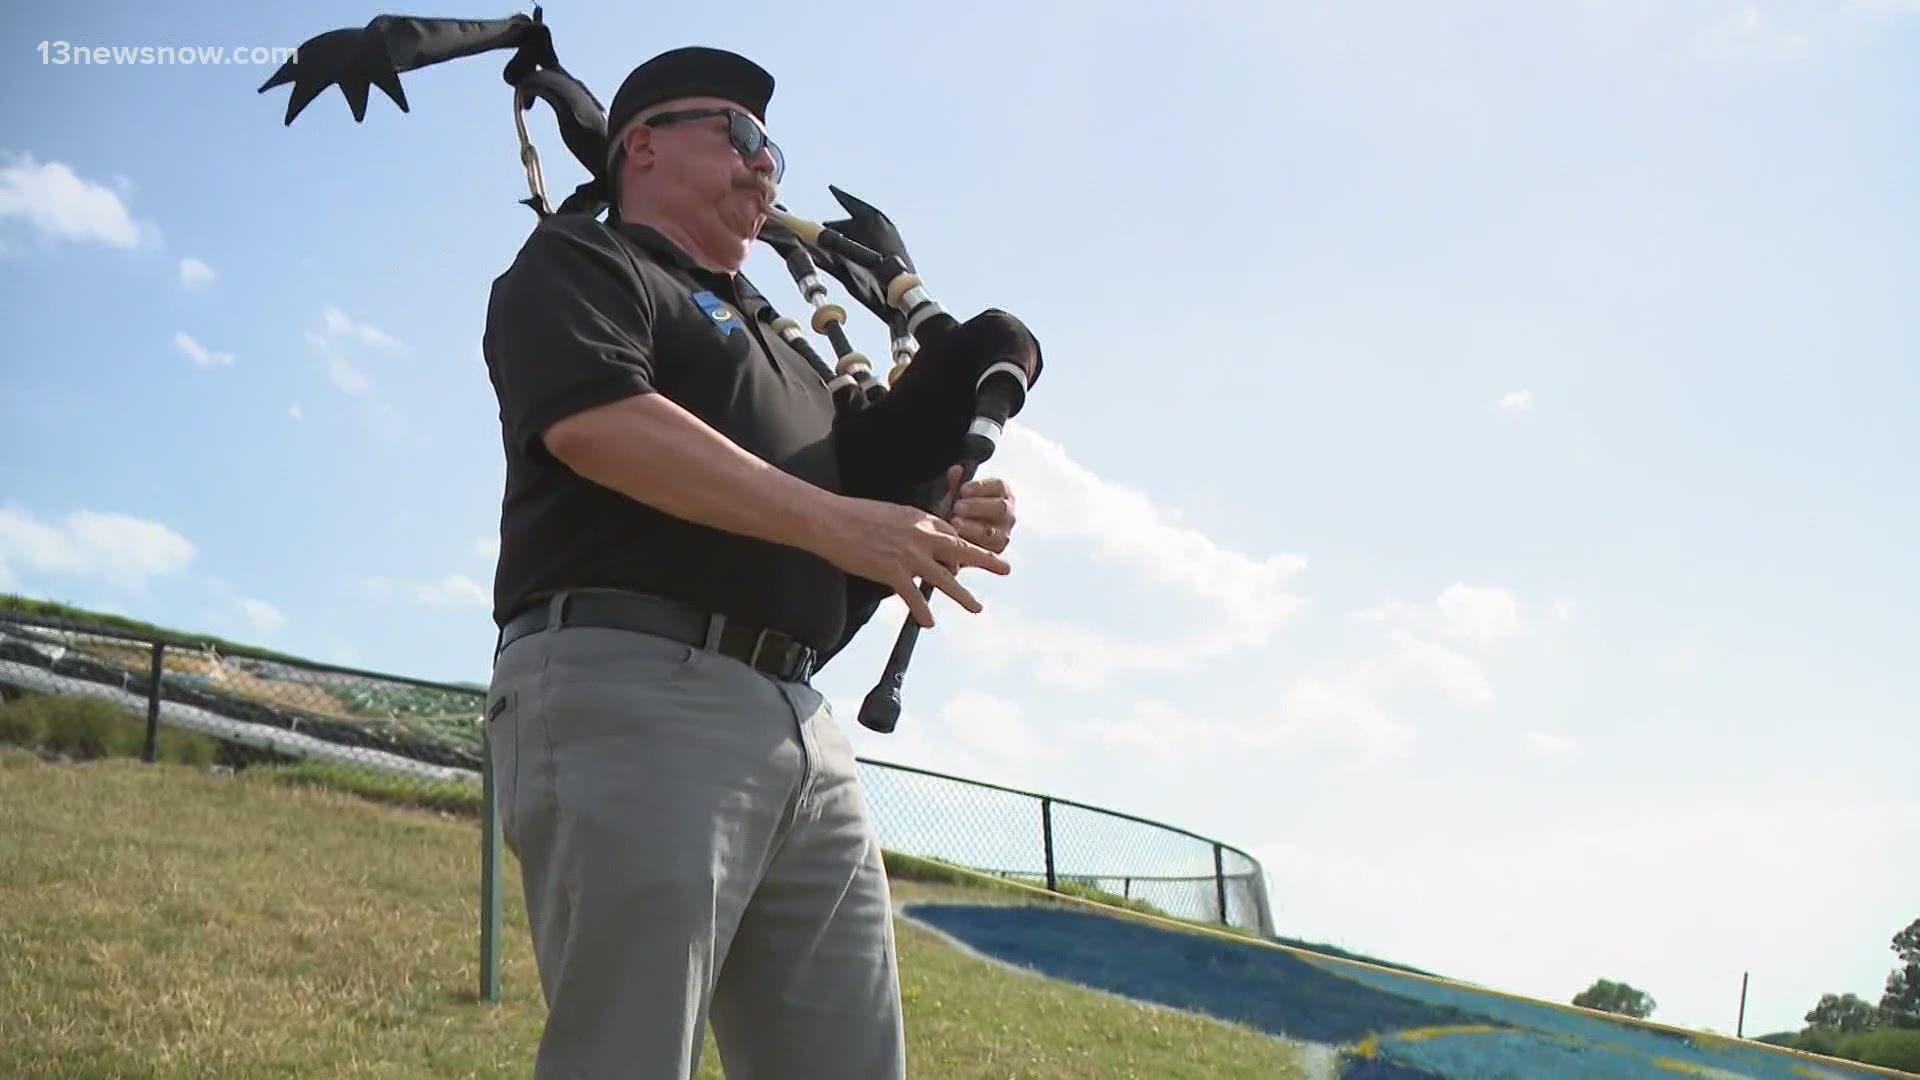 Chris Rapp was one of 12 people killed in the May 31, 2019 shooting. Rapp and Thom Metz played together for Tidewater Bagpipes and Drums.